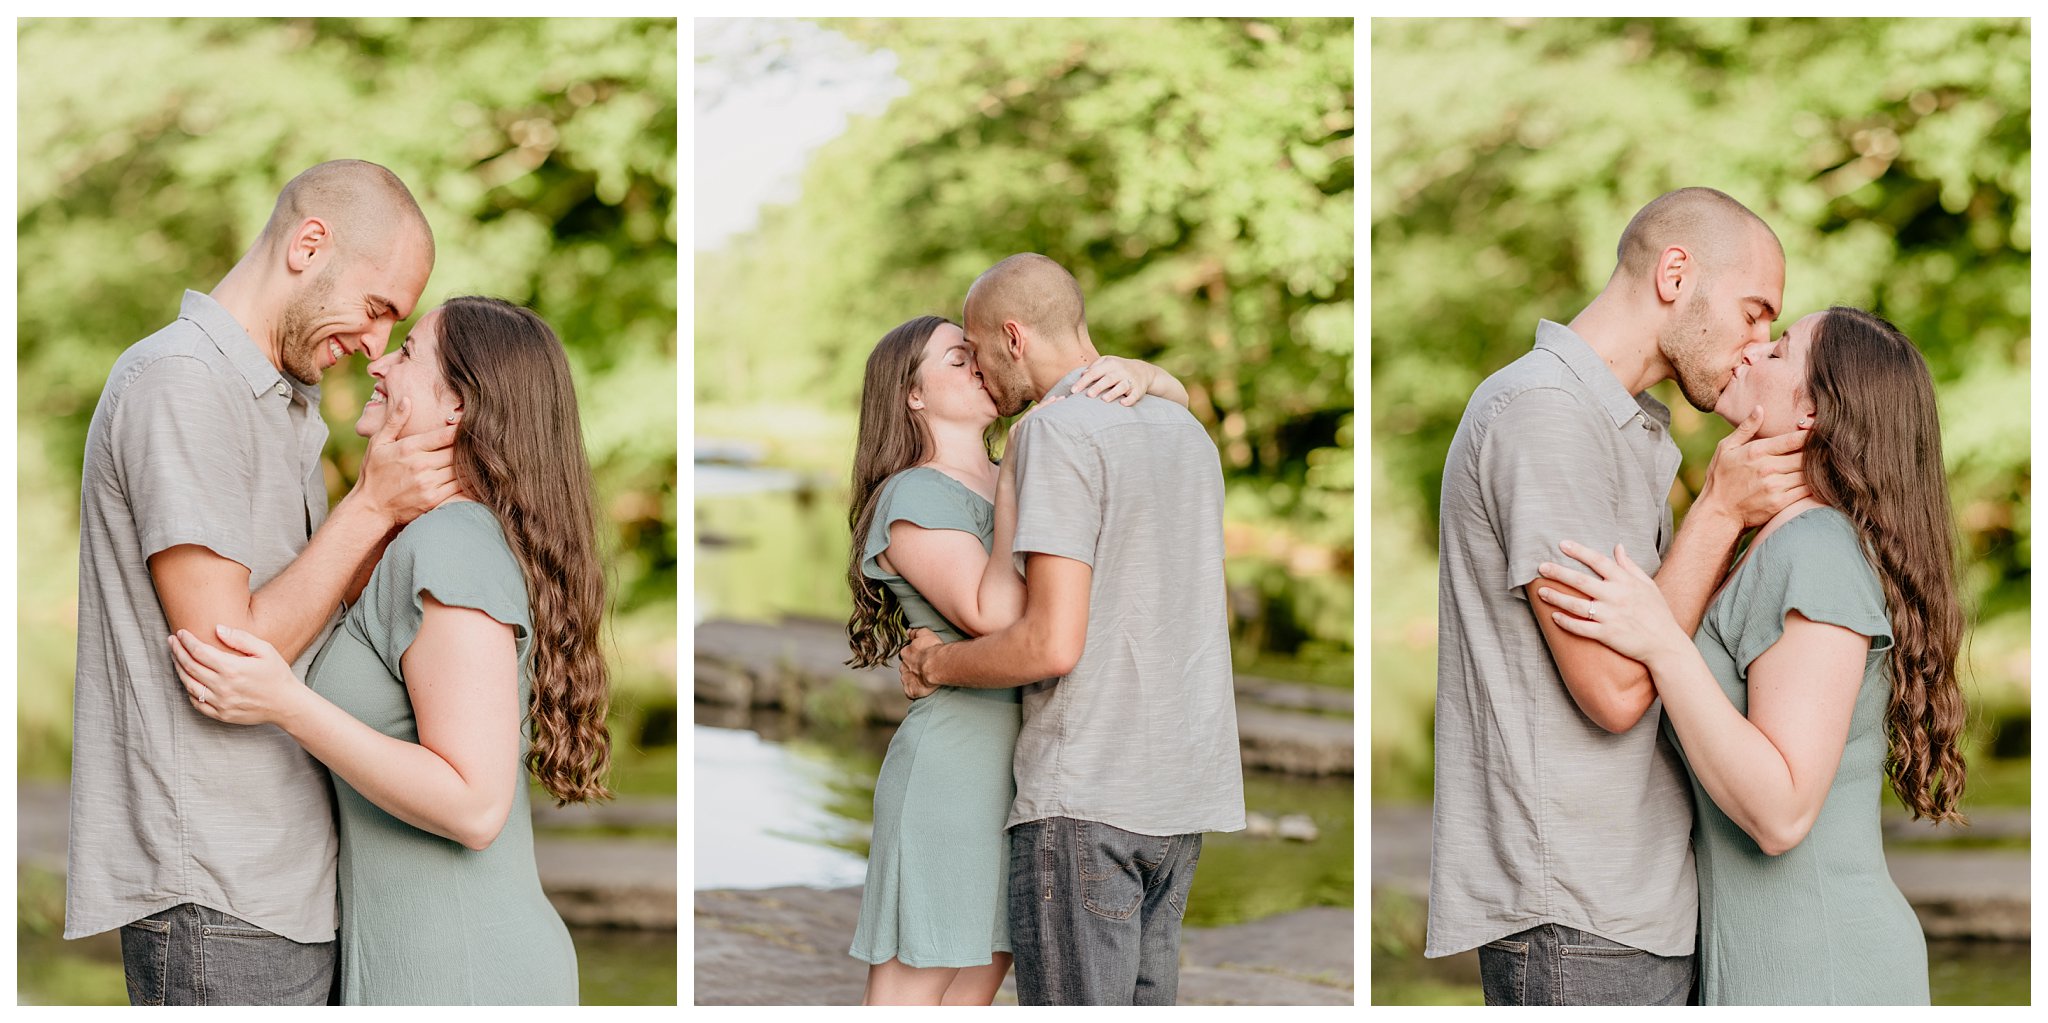 Salmon River Falls Engagement Session Joanna Young Photography_0003.jpg